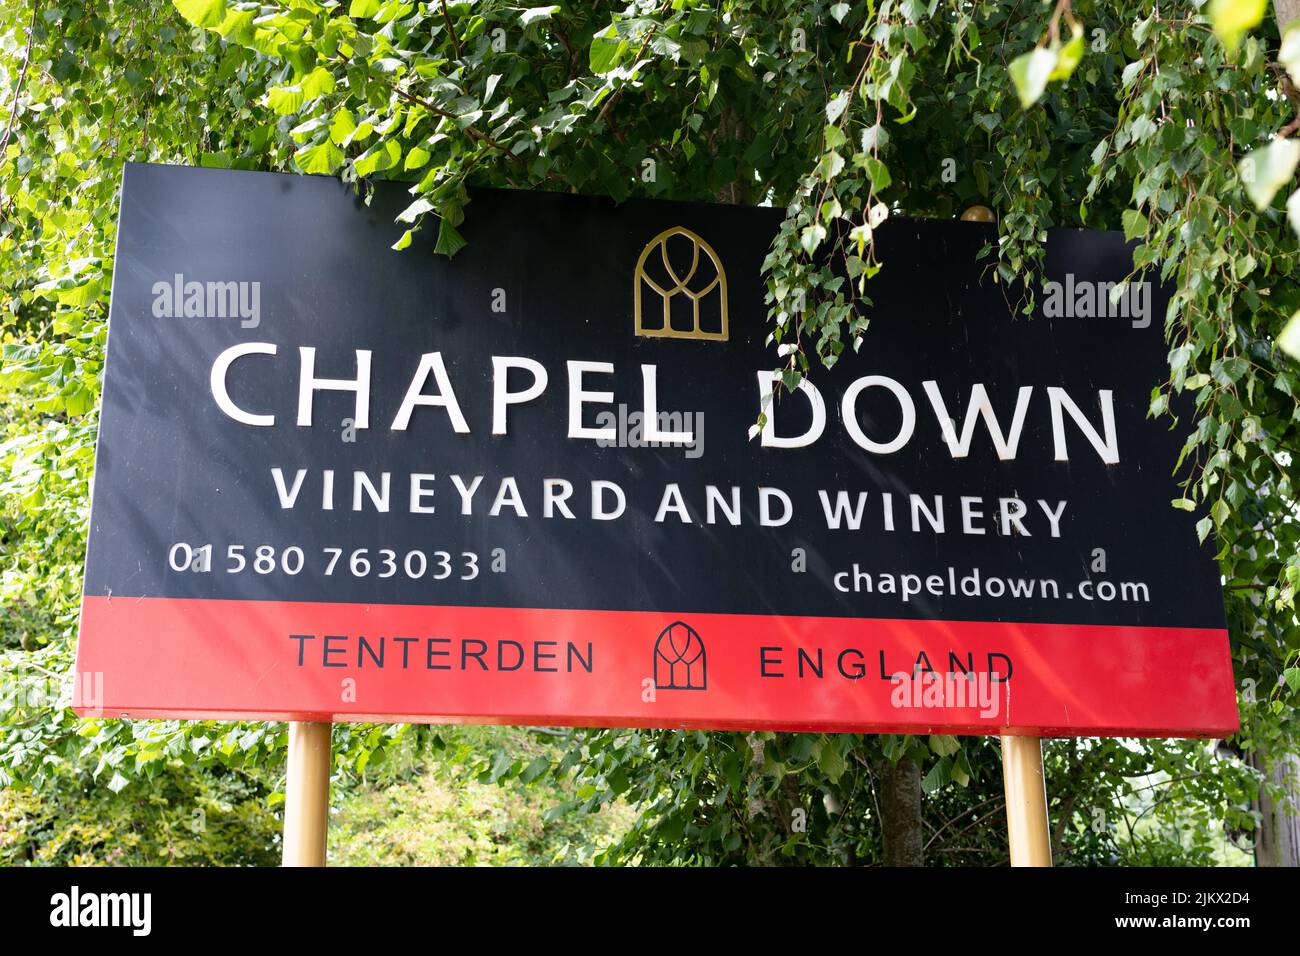 Chapel Down Vineyard and Winery, Tenterden, Ashford, Kent, Angleterre, ROYAUME-UNI Banque D'Images